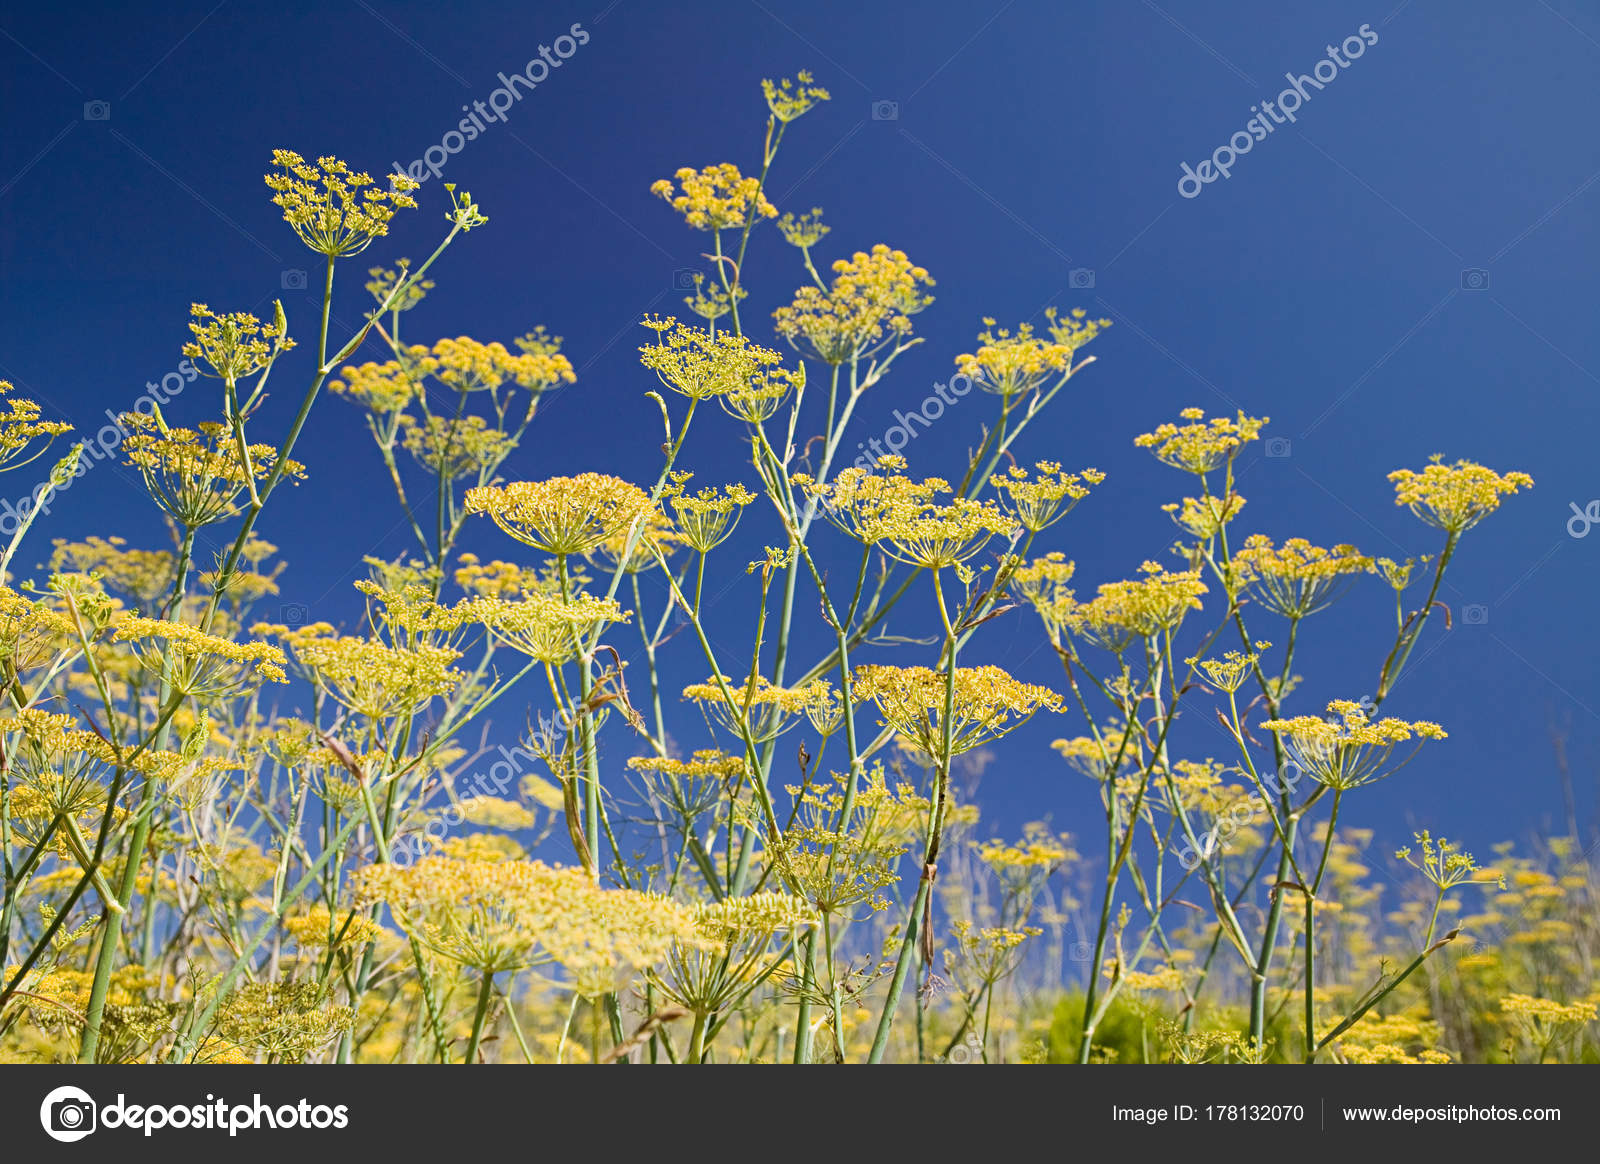 View Wild Fennel Flowers Blue Background Stock Photo C Imagesource 178132070